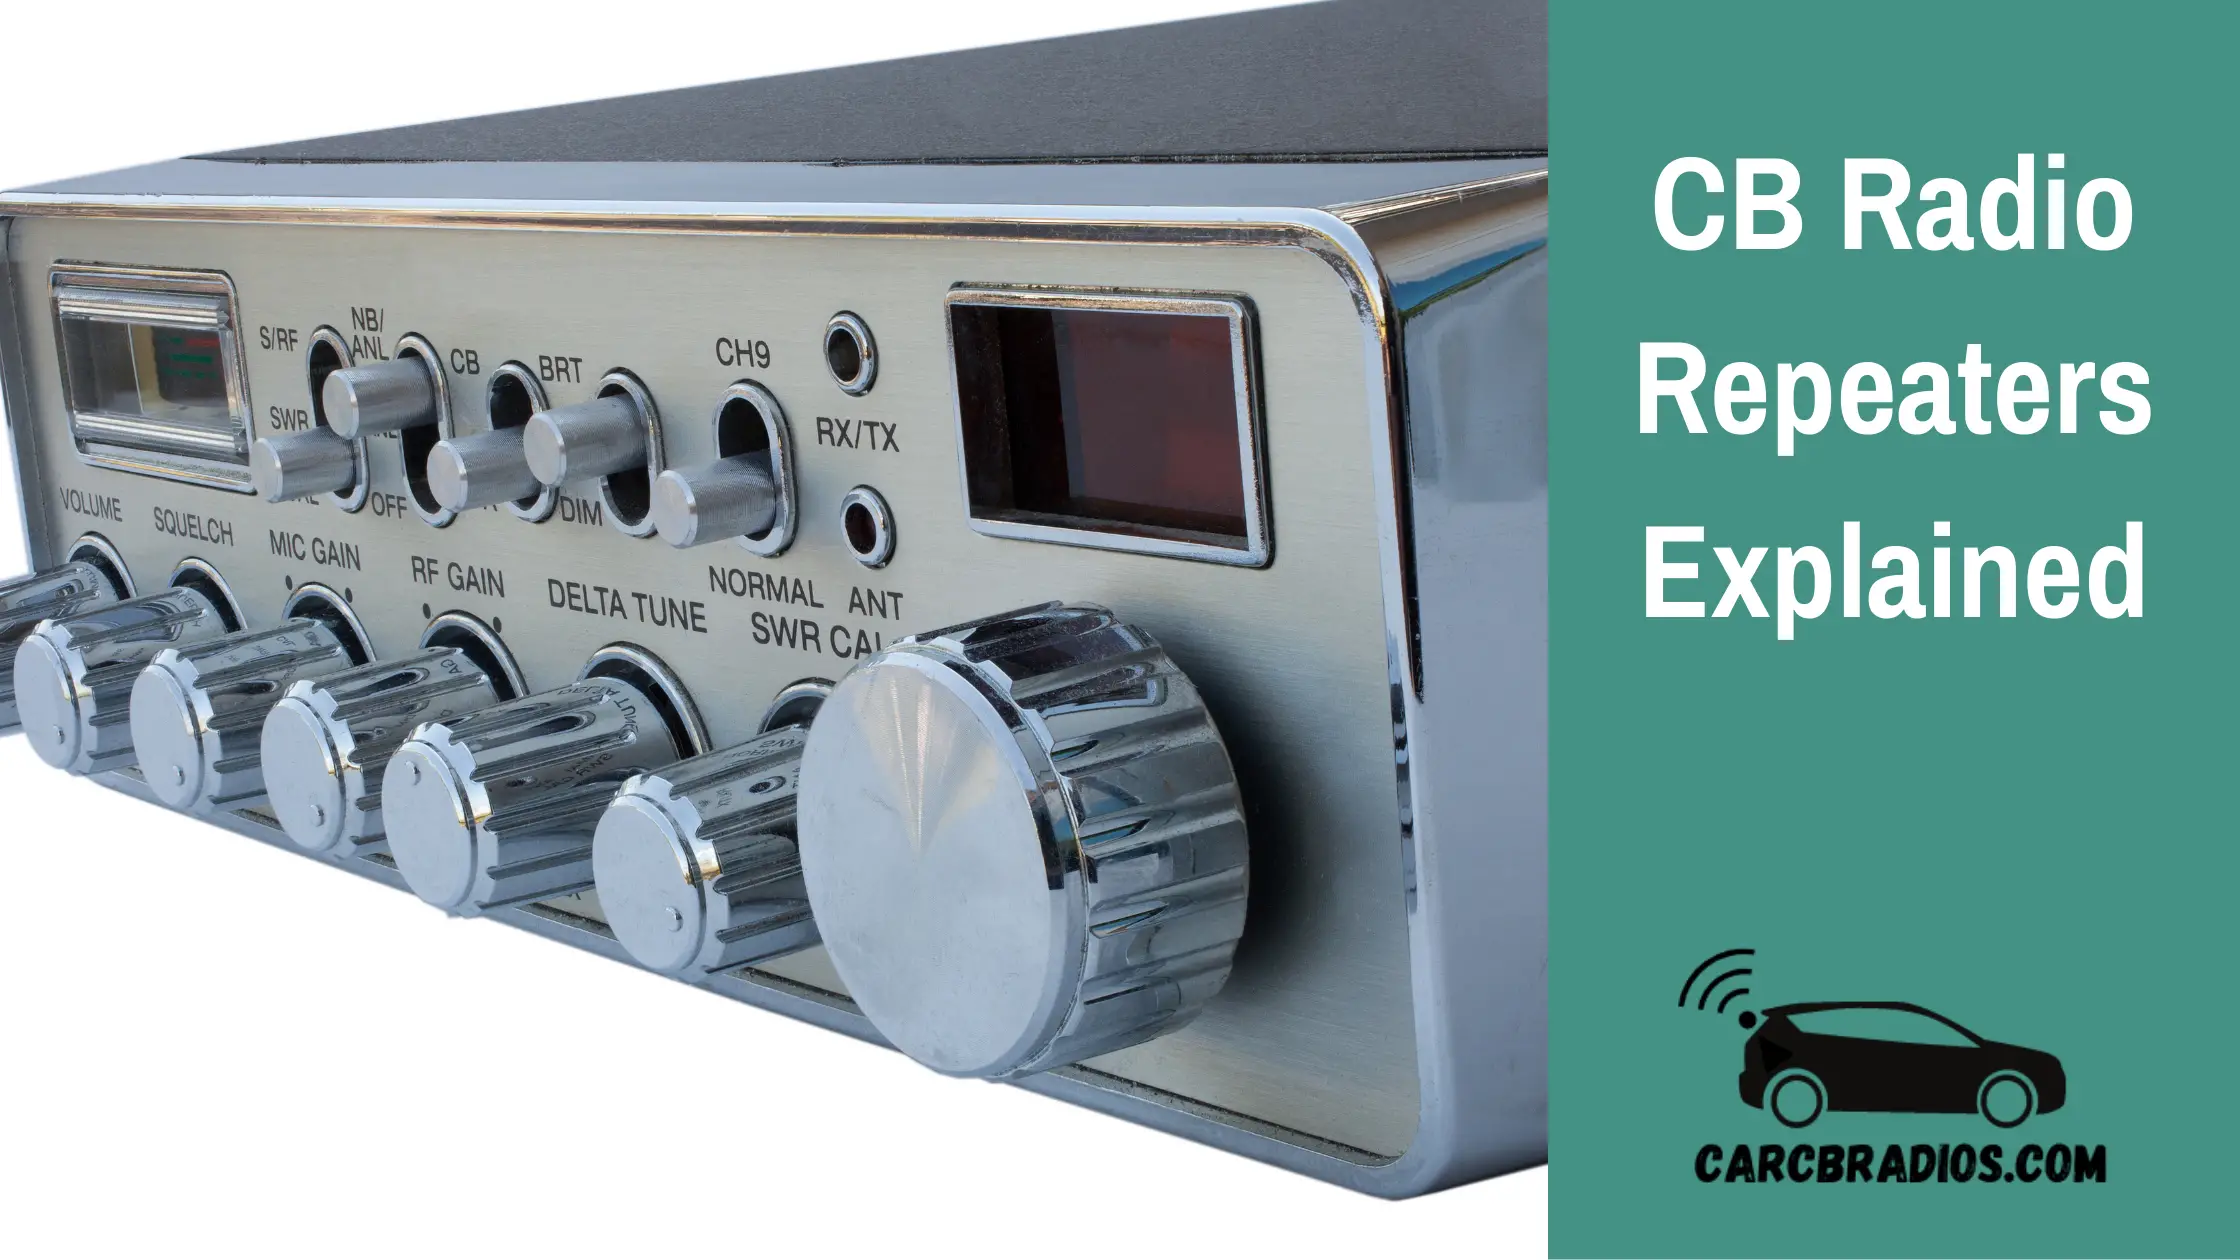 What is a CB Radio Repeater